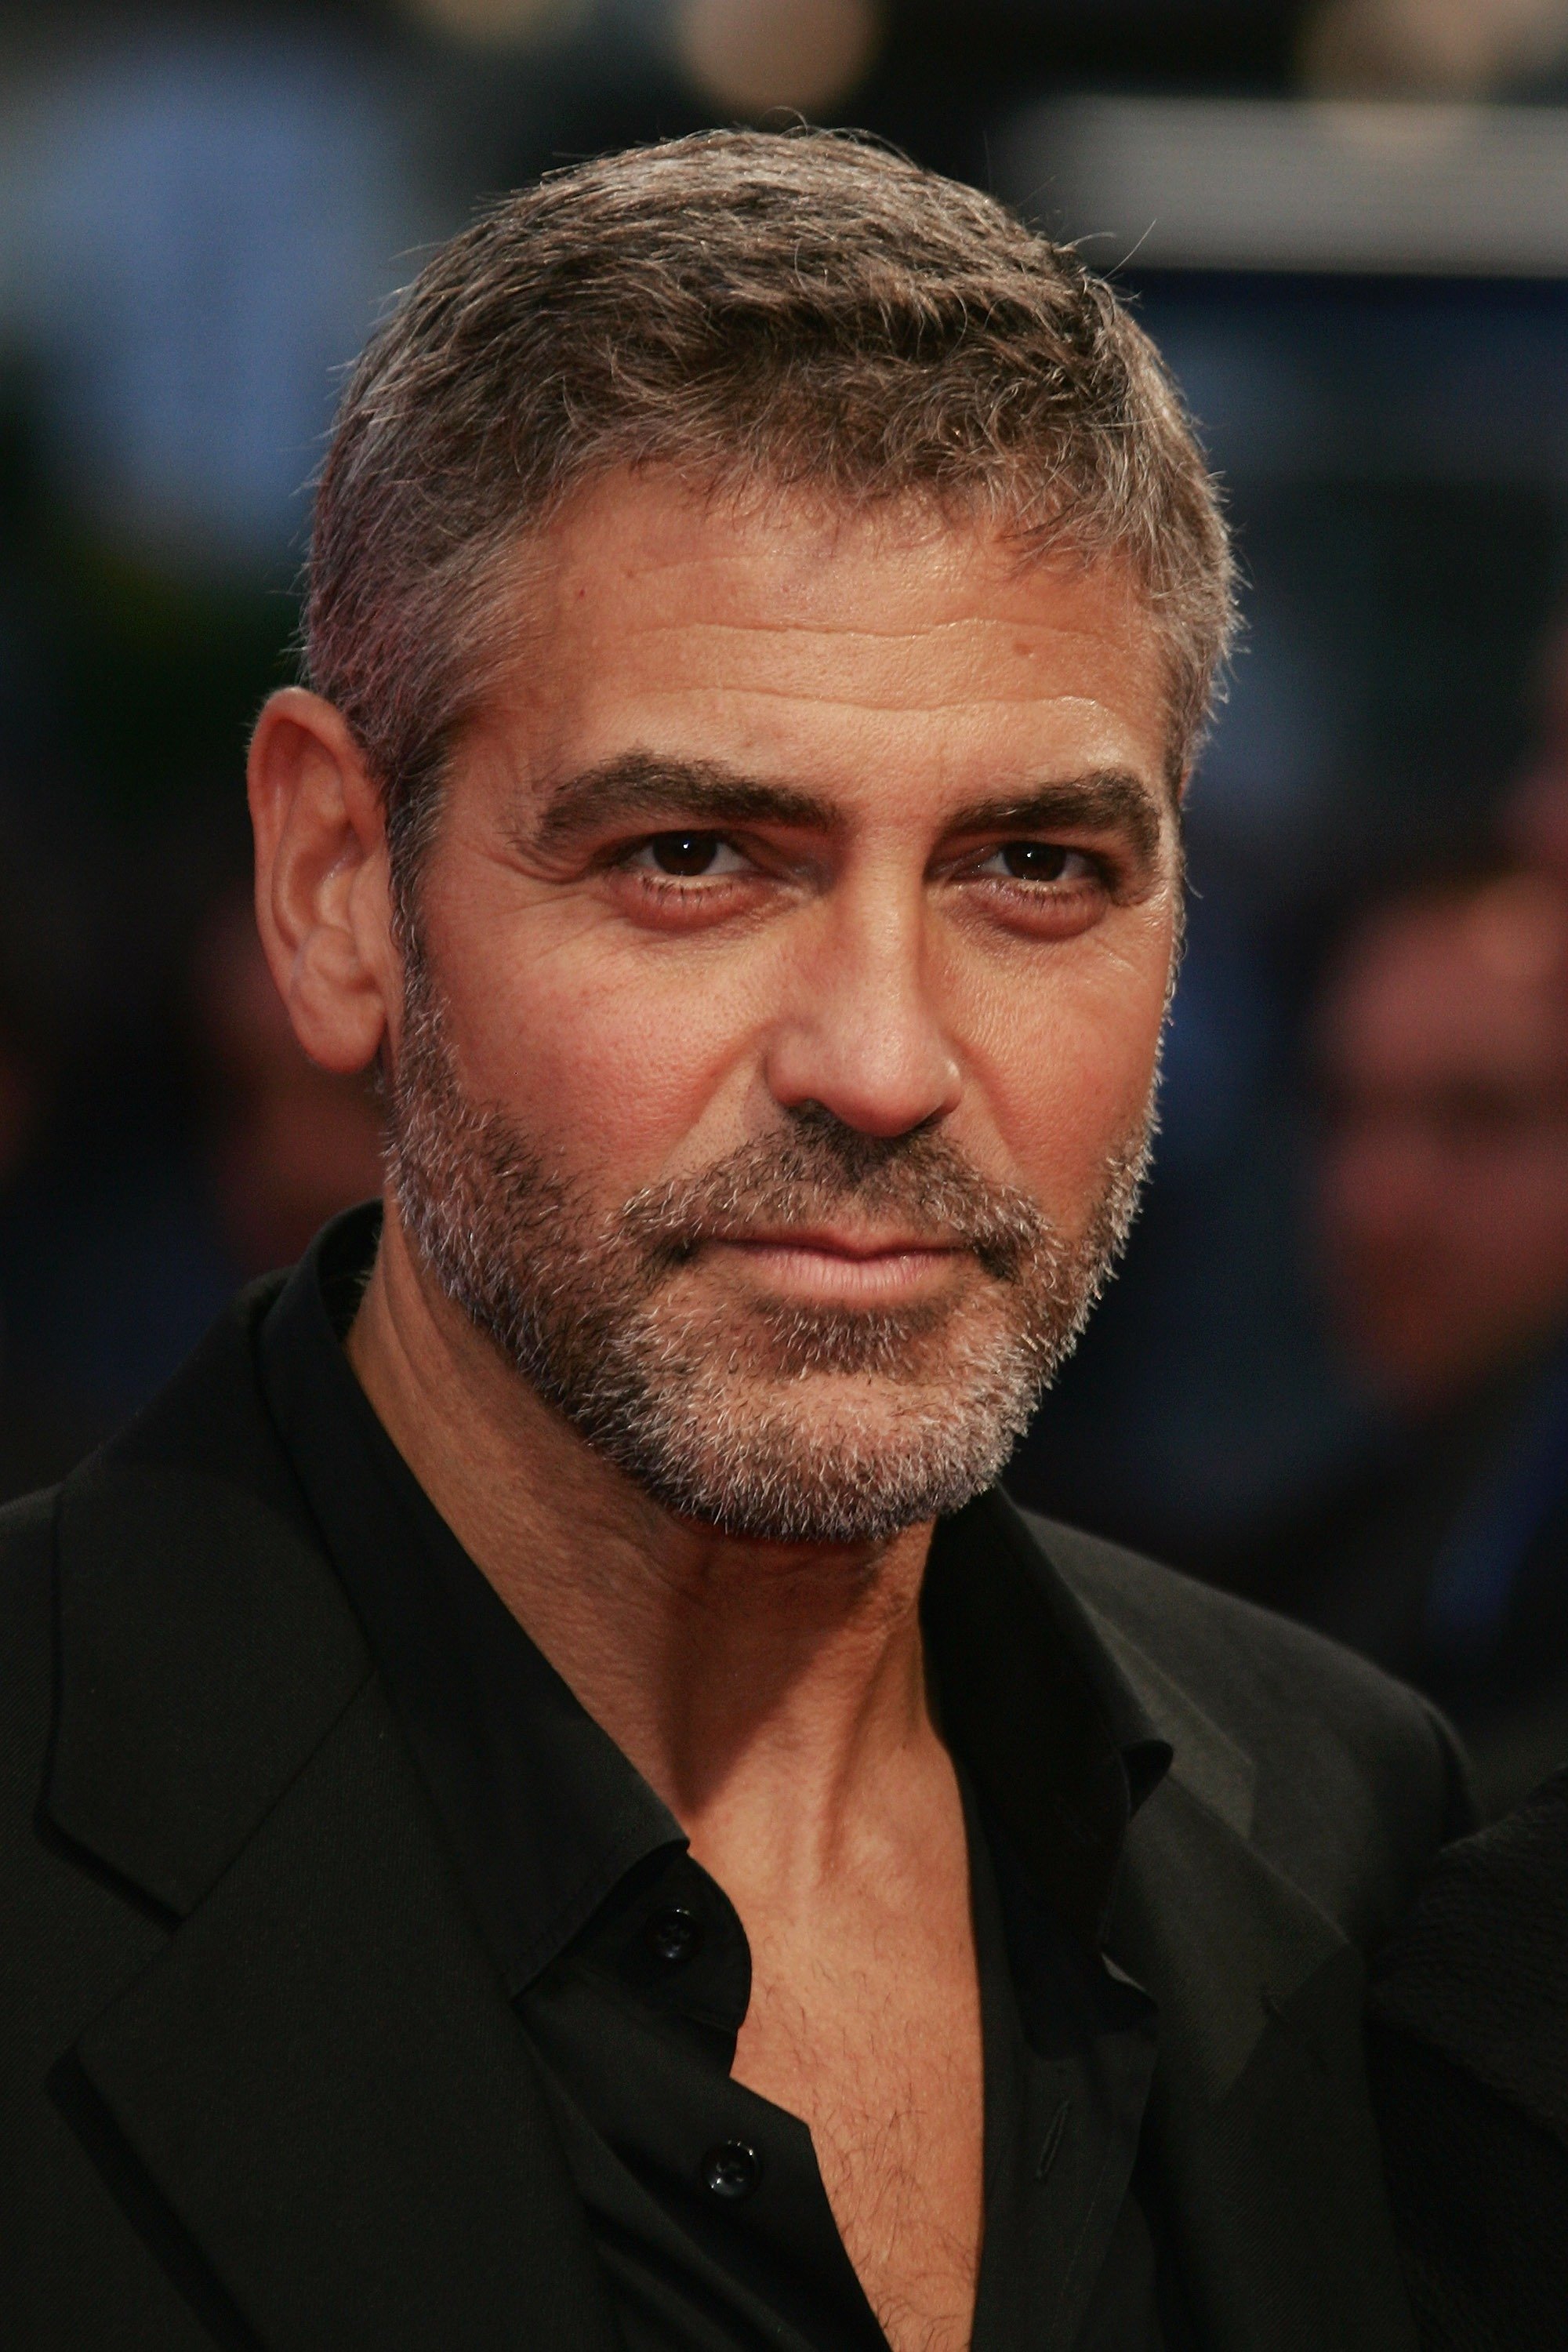 George Clooney poses as he arrives to attend the premiere of Michael Clayton during the 33rd Deauville American Film Festival, on September 2, 2007, in Deauville, France. | Source: Getty Images.